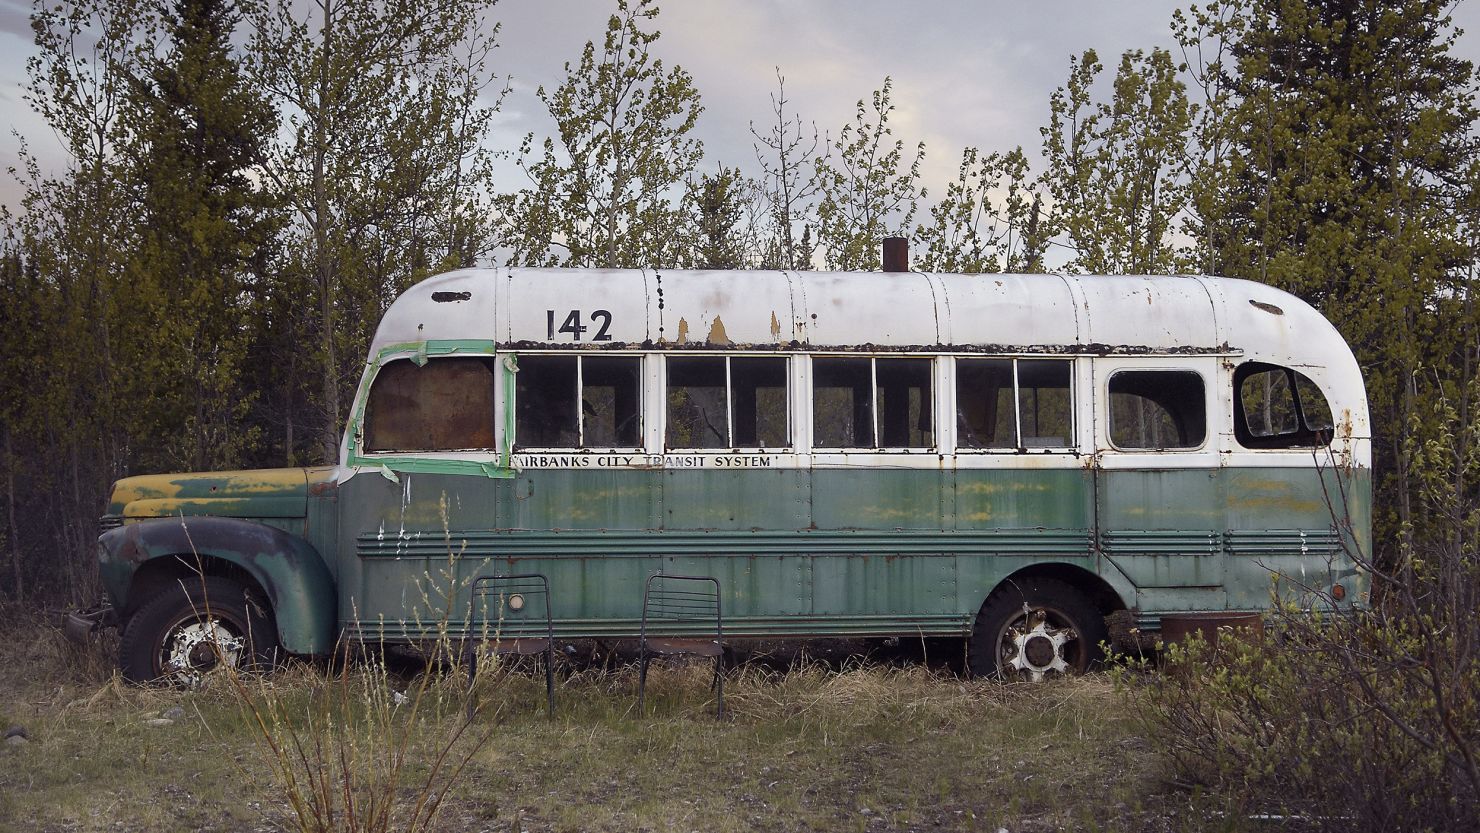 This abandoned bus on the Stampede Trail in Alaska became the camp of Chris McCandless in 1992. The story of his life and death at this spot became the subject of the book "into the Wild," later turned into a movie.